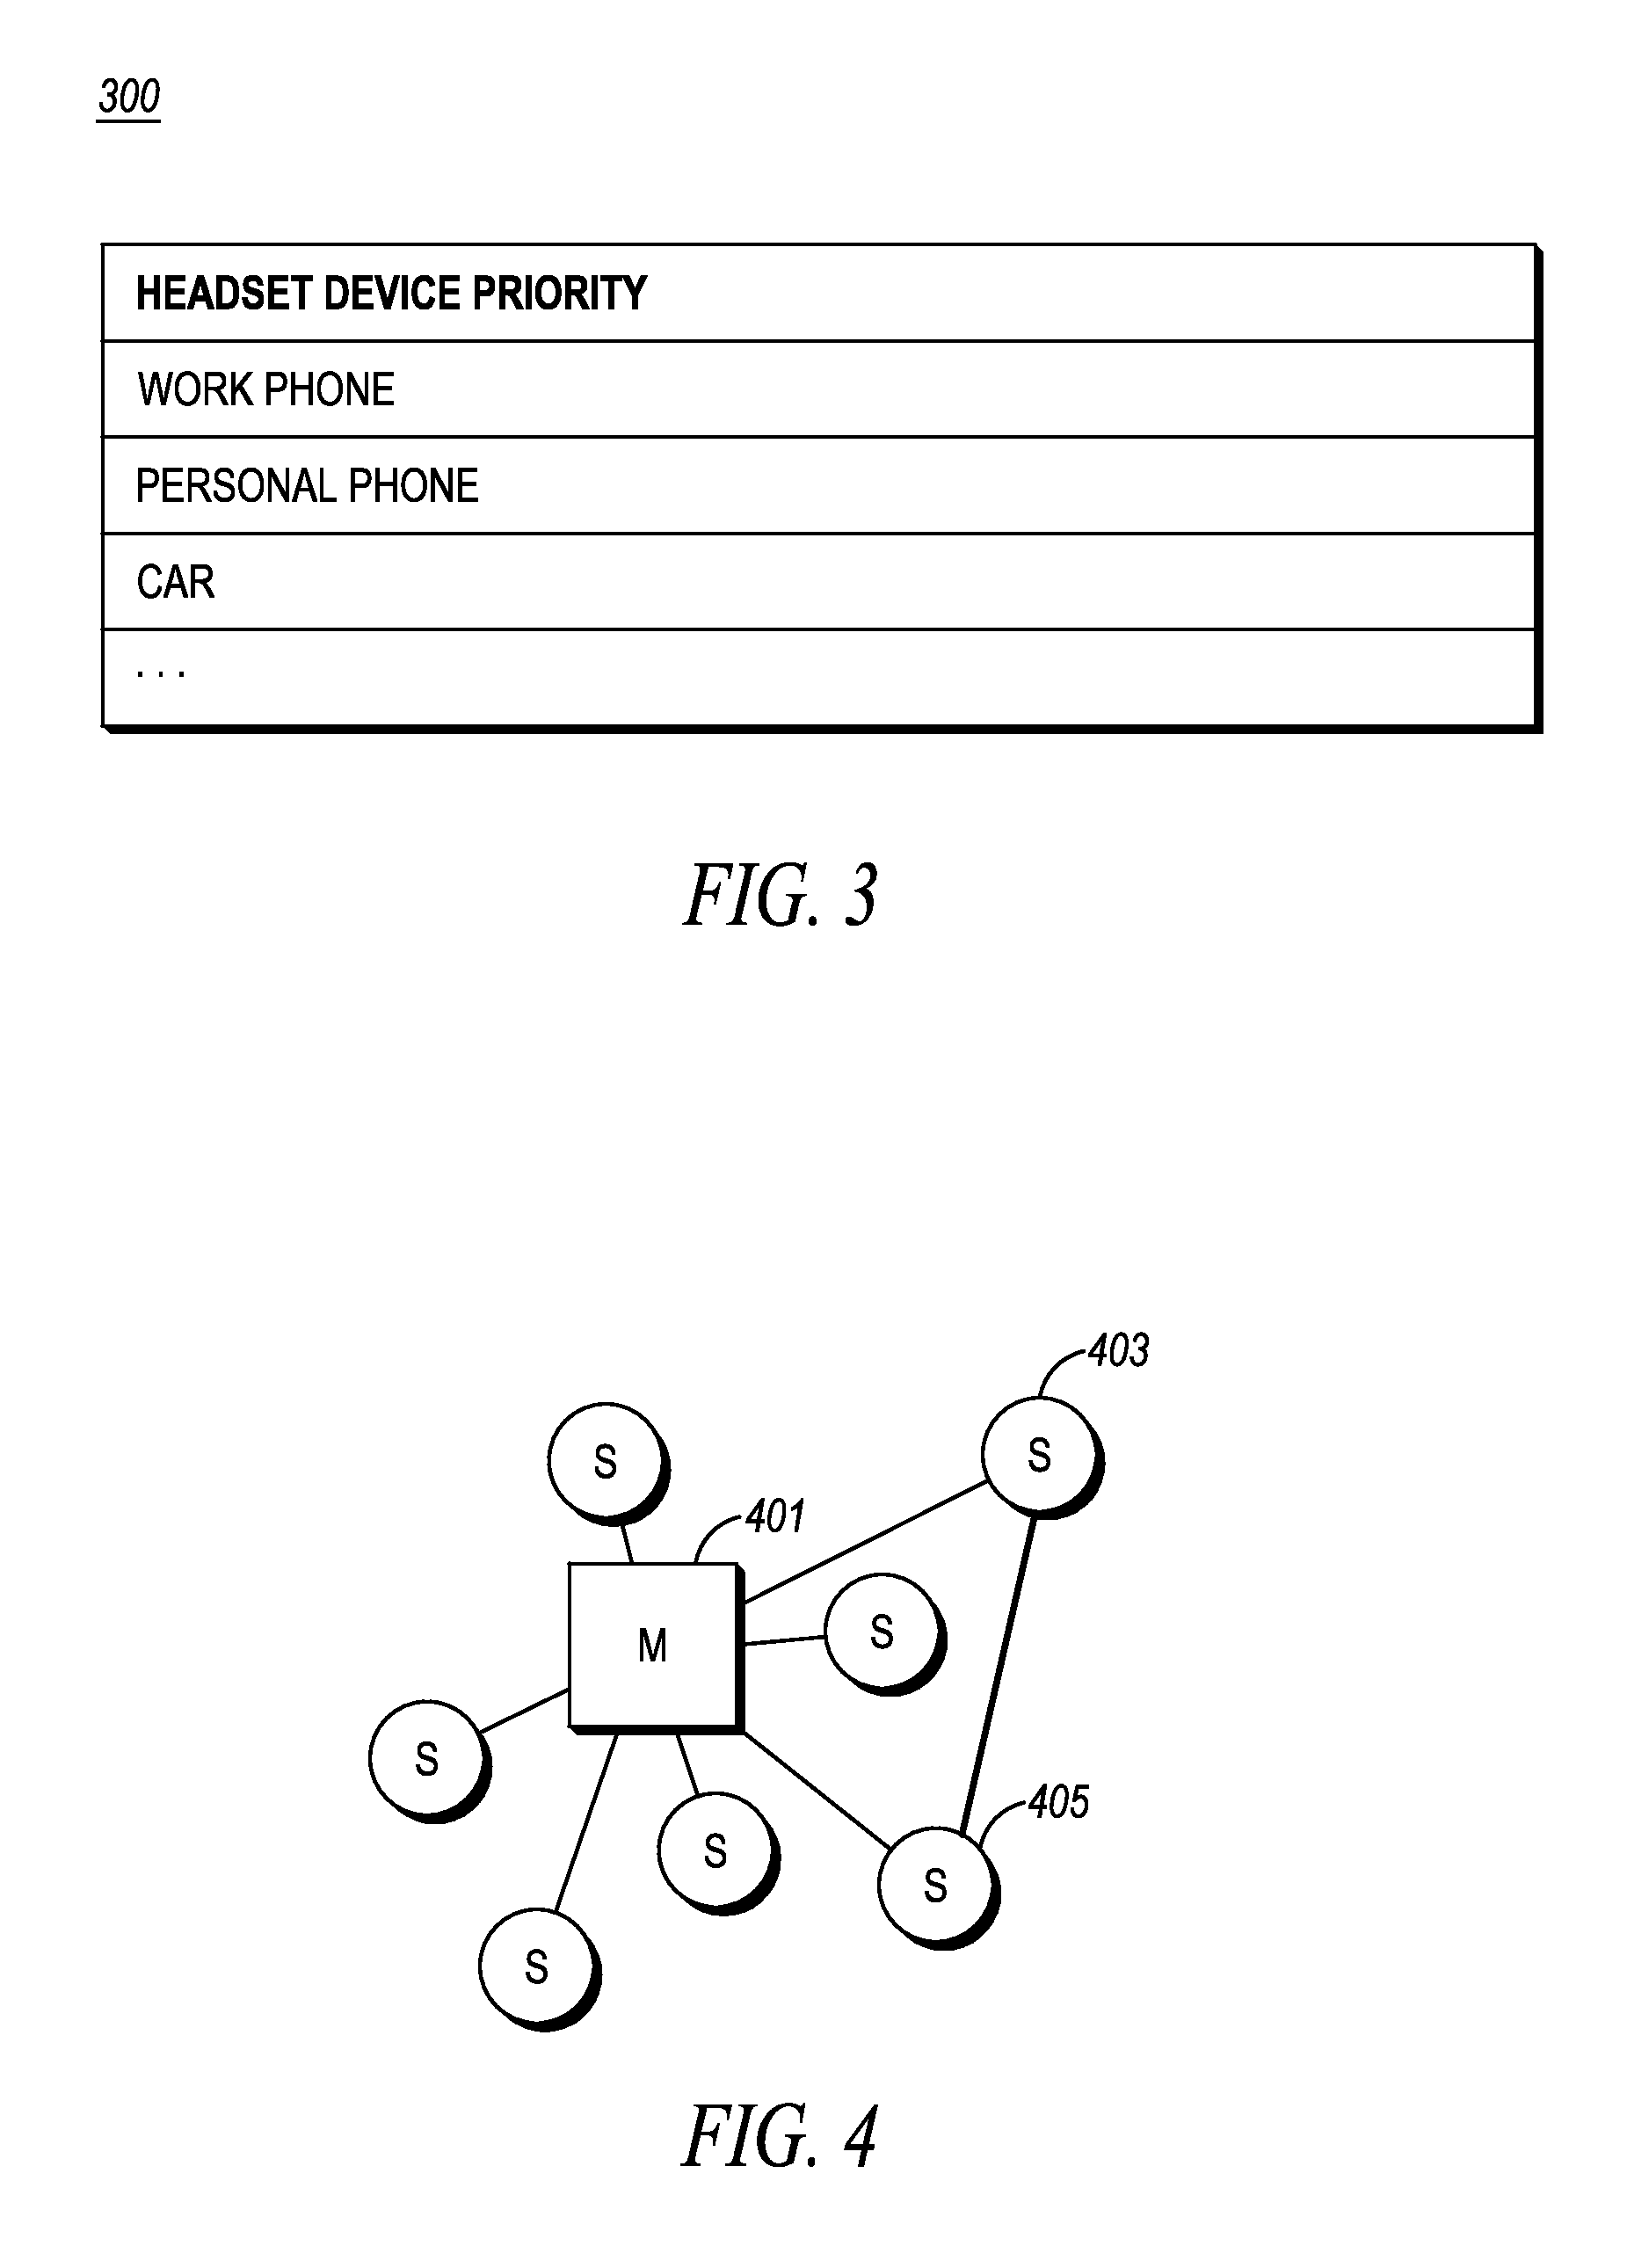 Method and apparatus for connecting a bluetooth device